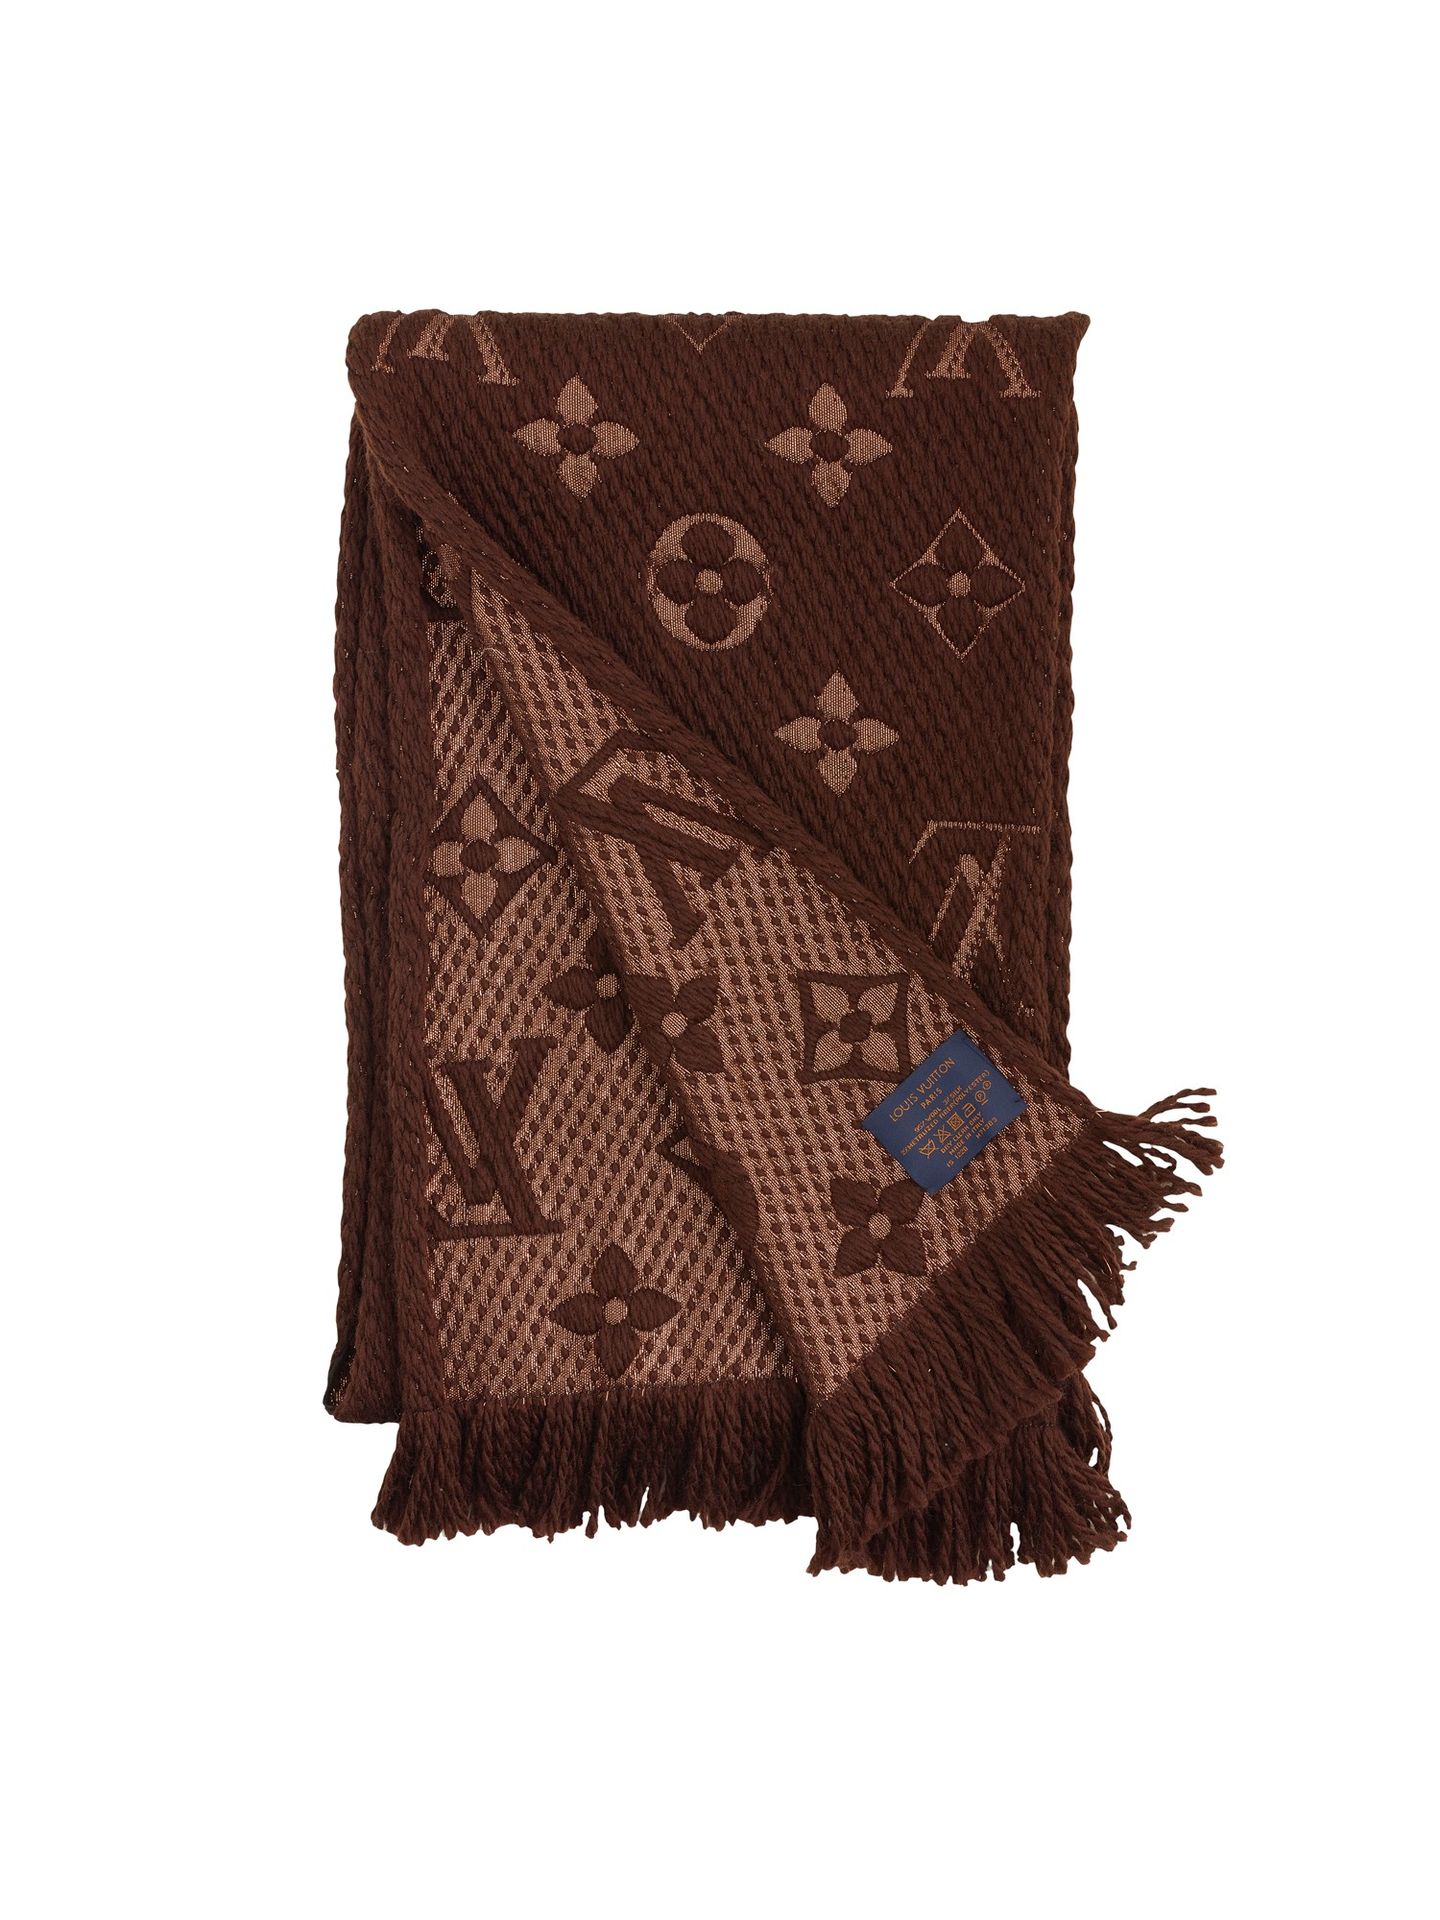 Louis Vuitton monogram scarf in wool, silk and polyester…